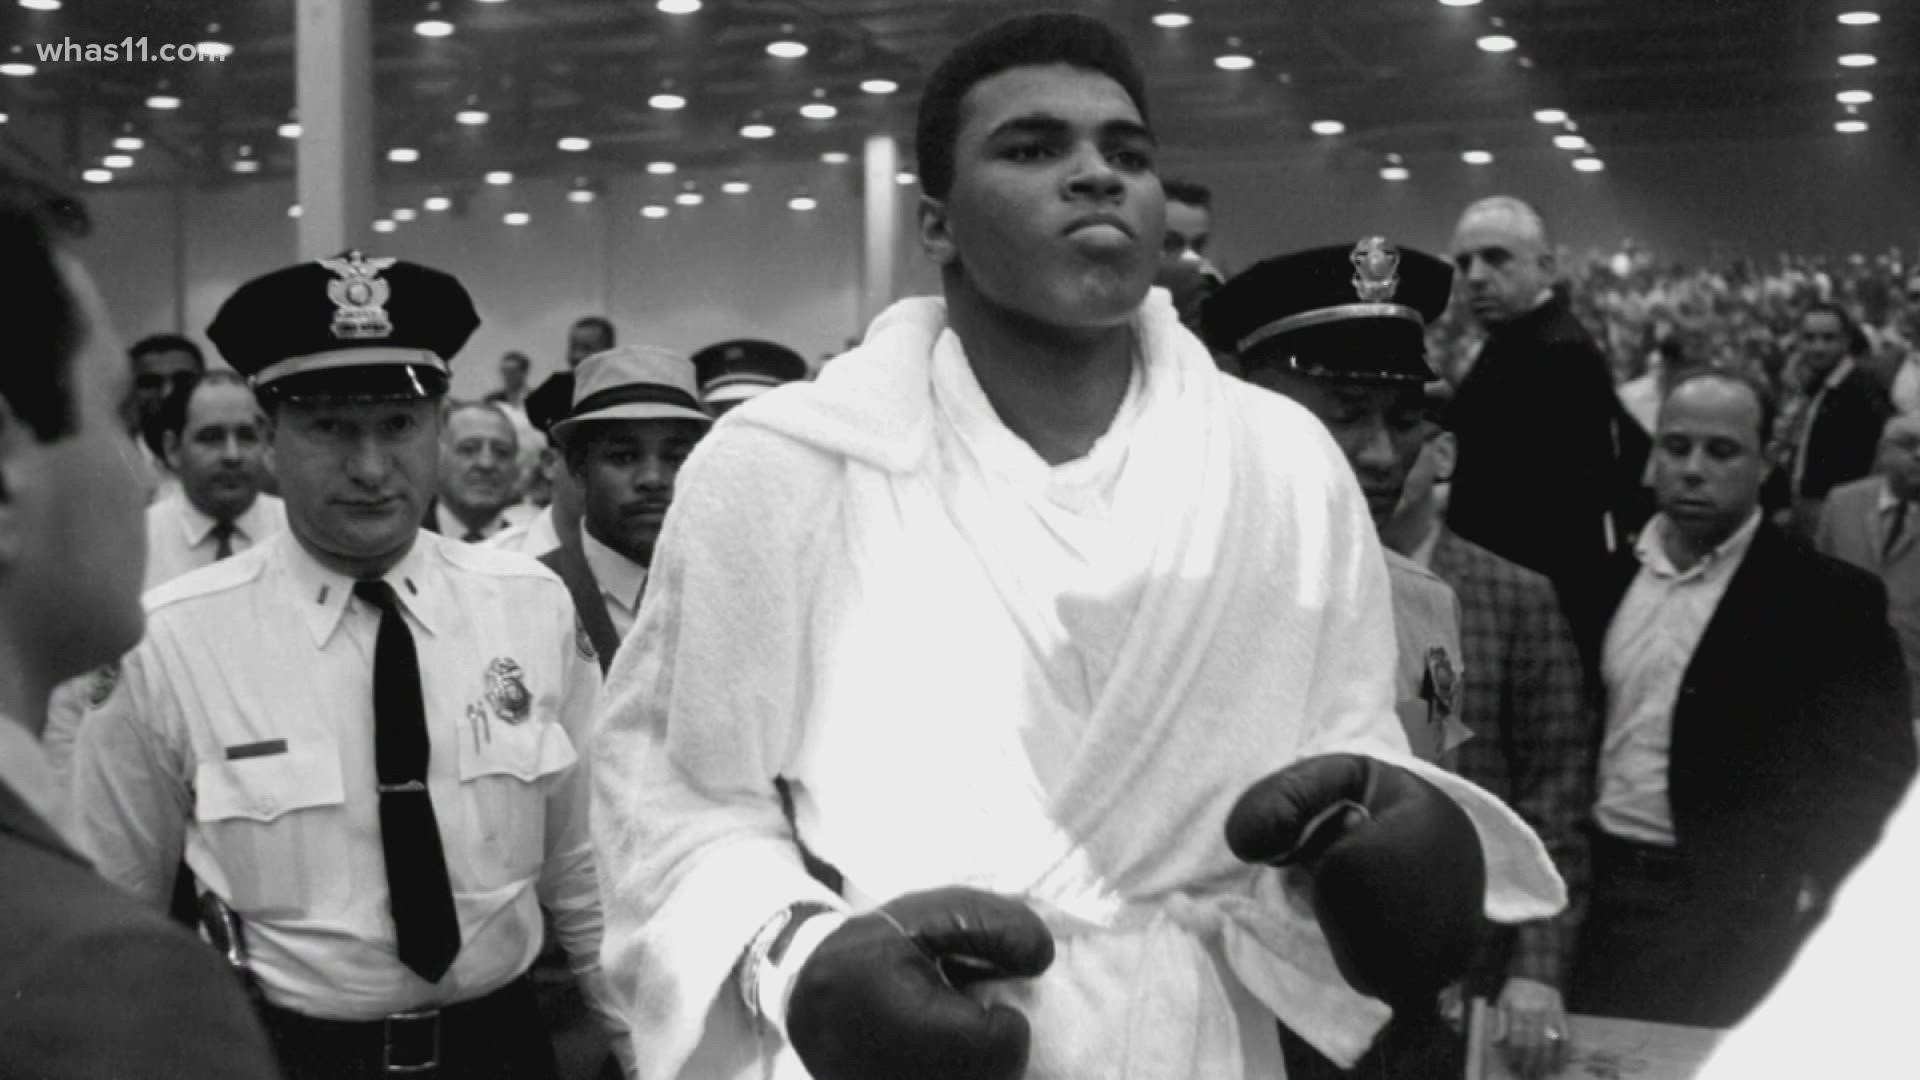 Plenty of rare footage from WHAS archives will be part of Ken Burns' Muhammad Ali documentary airing Sept. 19-22.